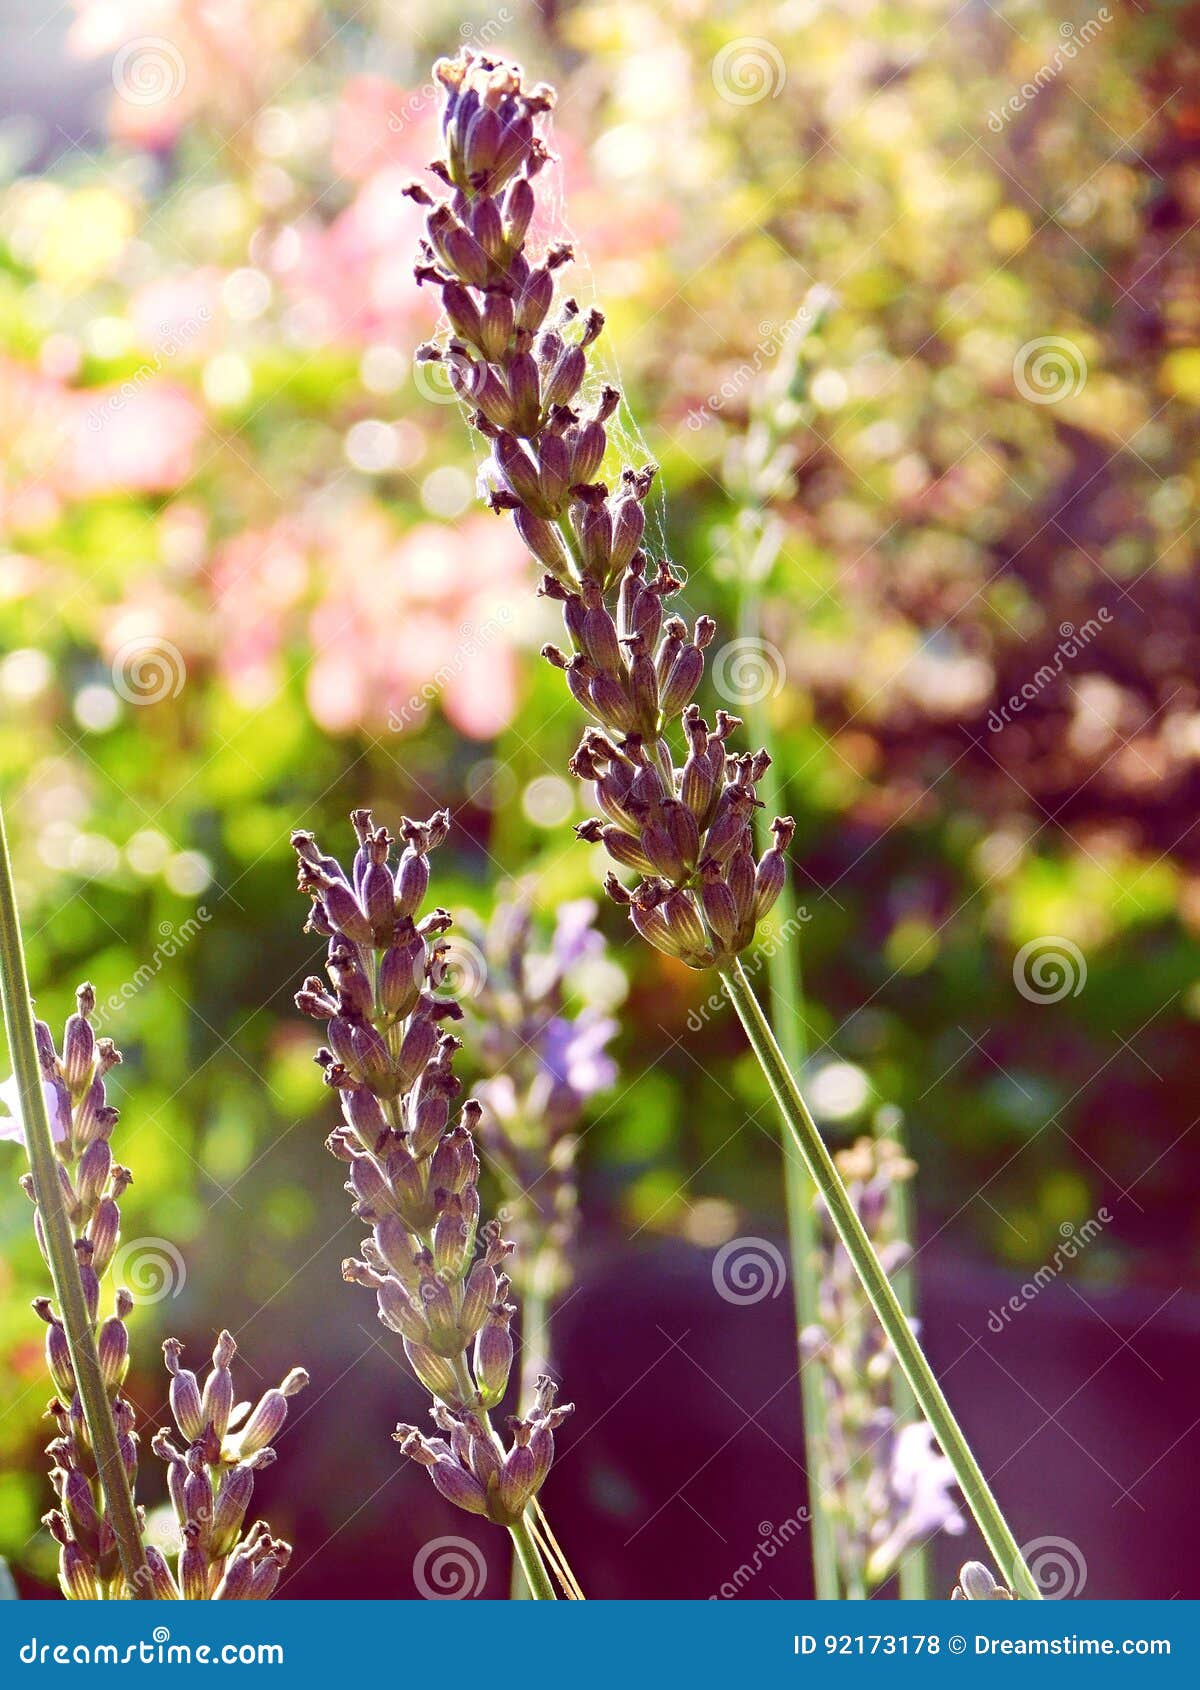 lavender in indian summer stock photo. image of flower - 92173178